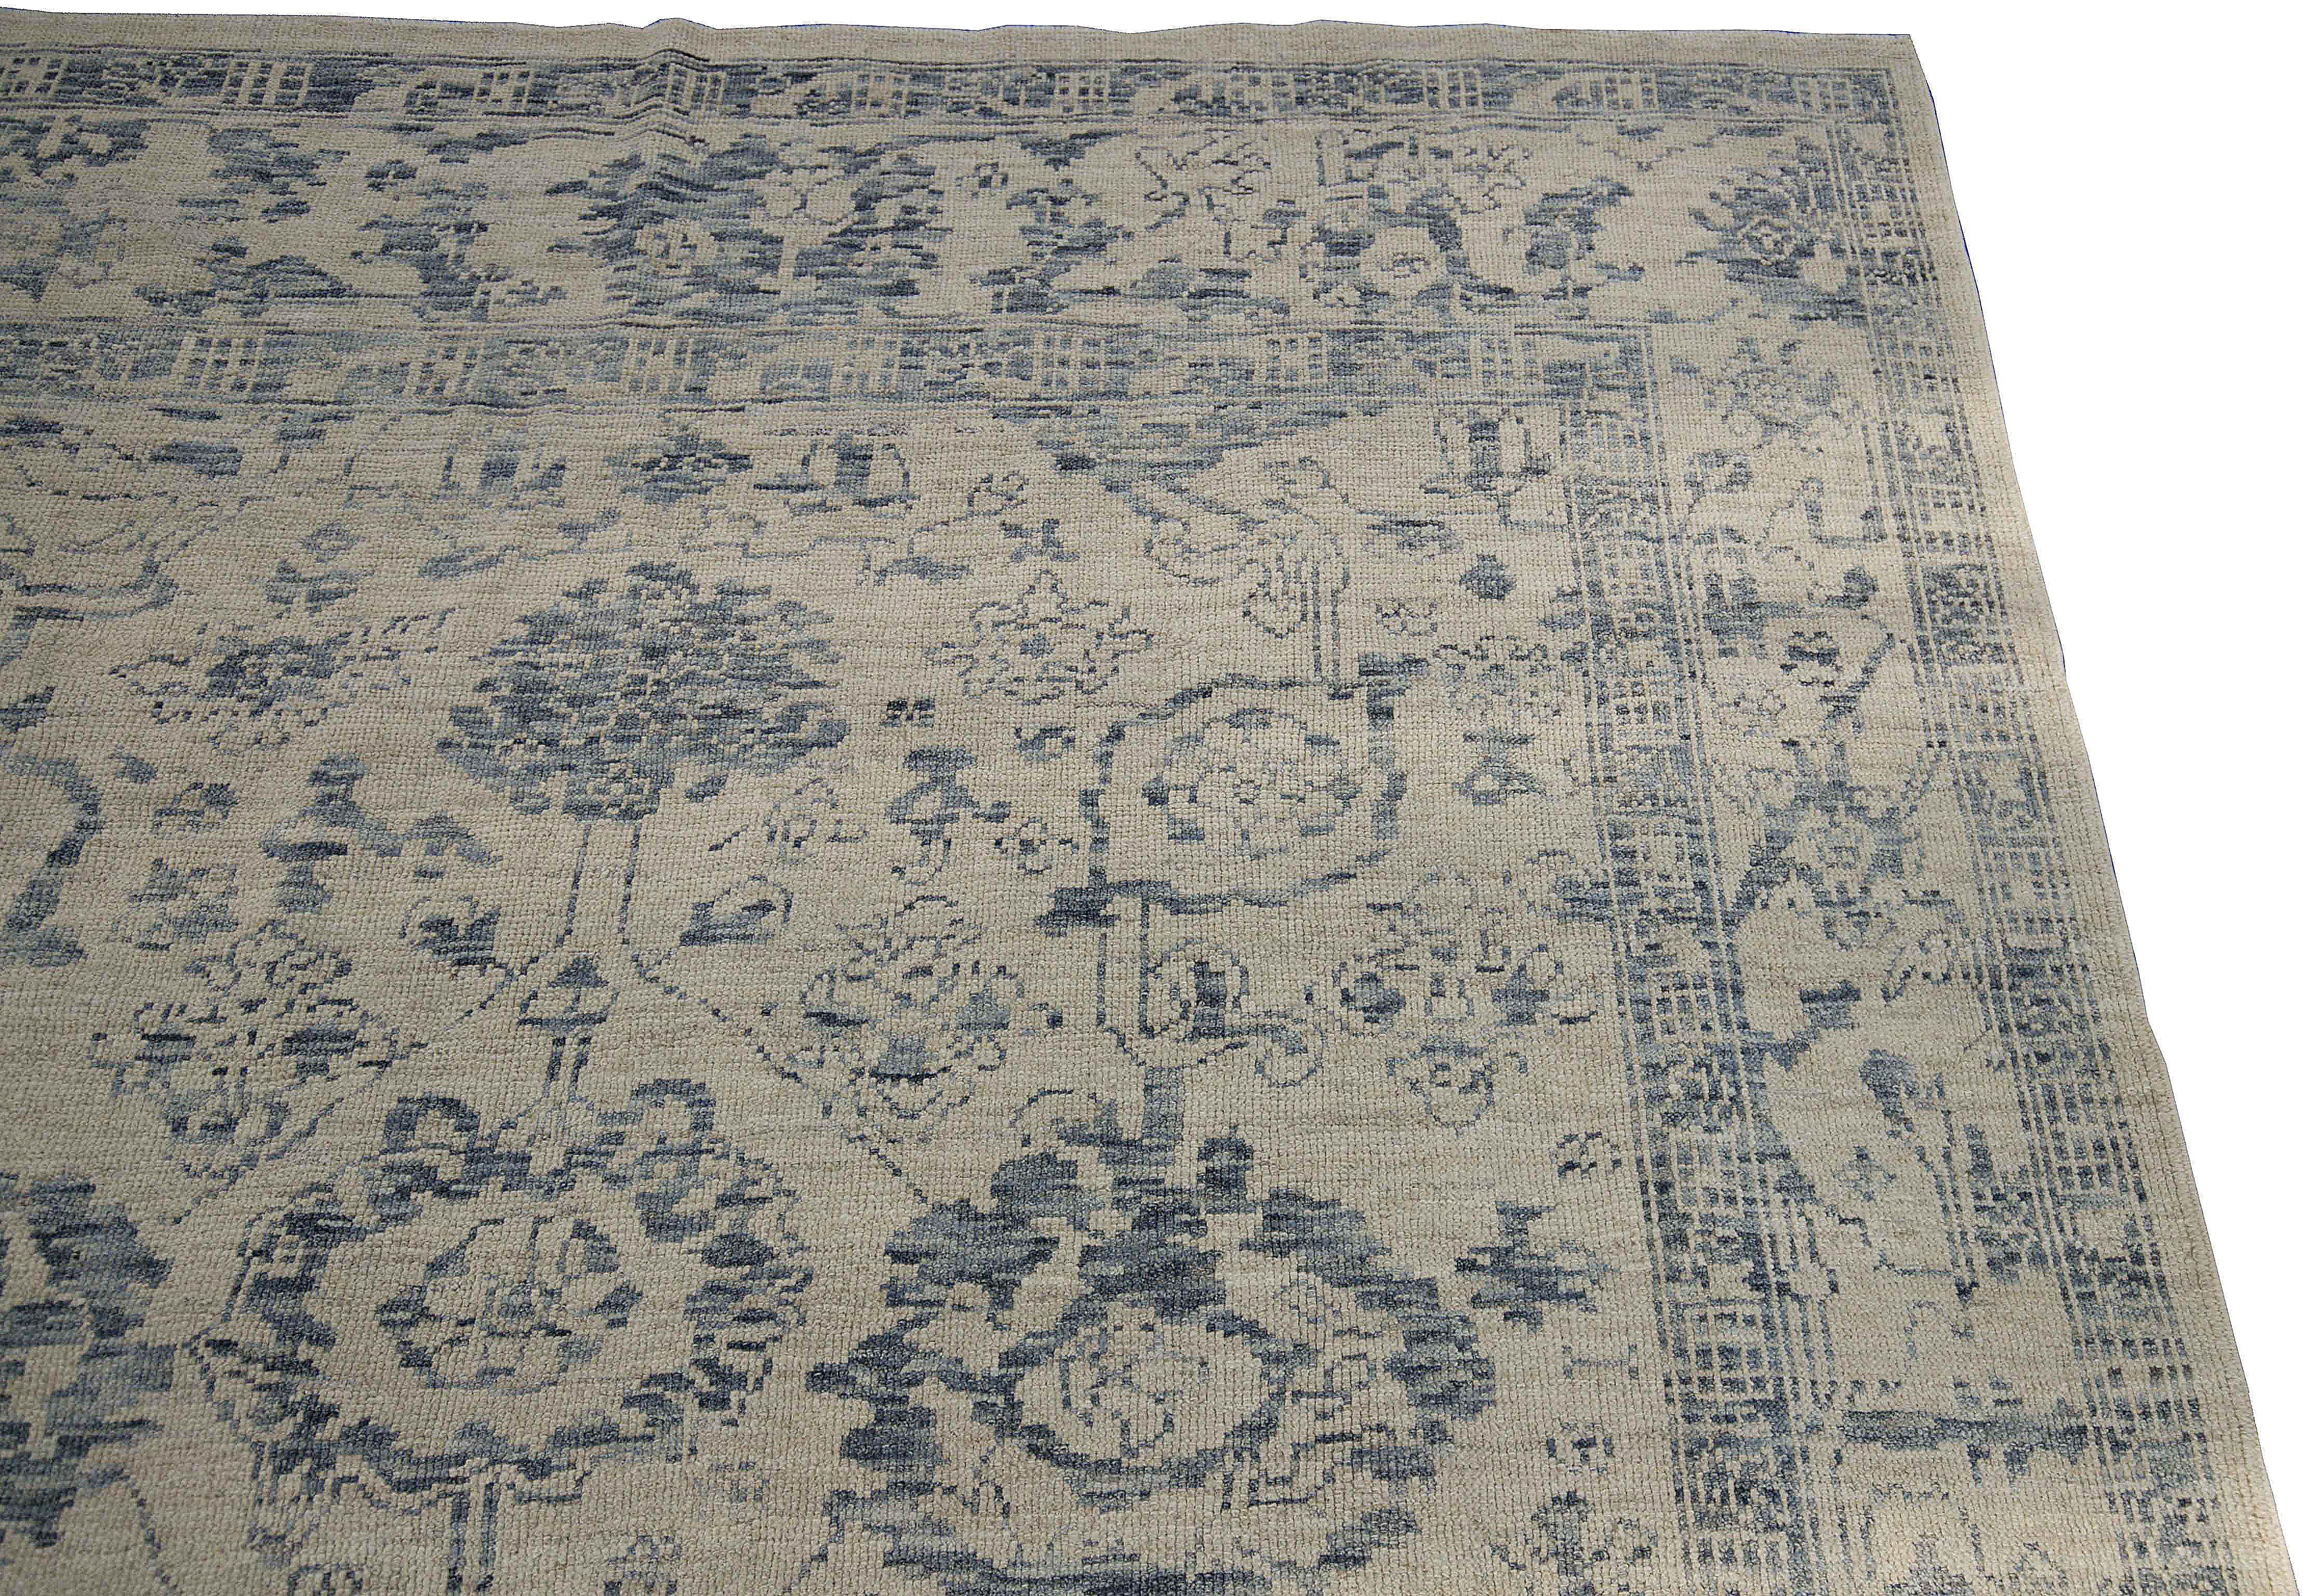 Turkish Modern Oushak Rug with Floral Details in Navy and Gray on Beige Ivory Field For Sale